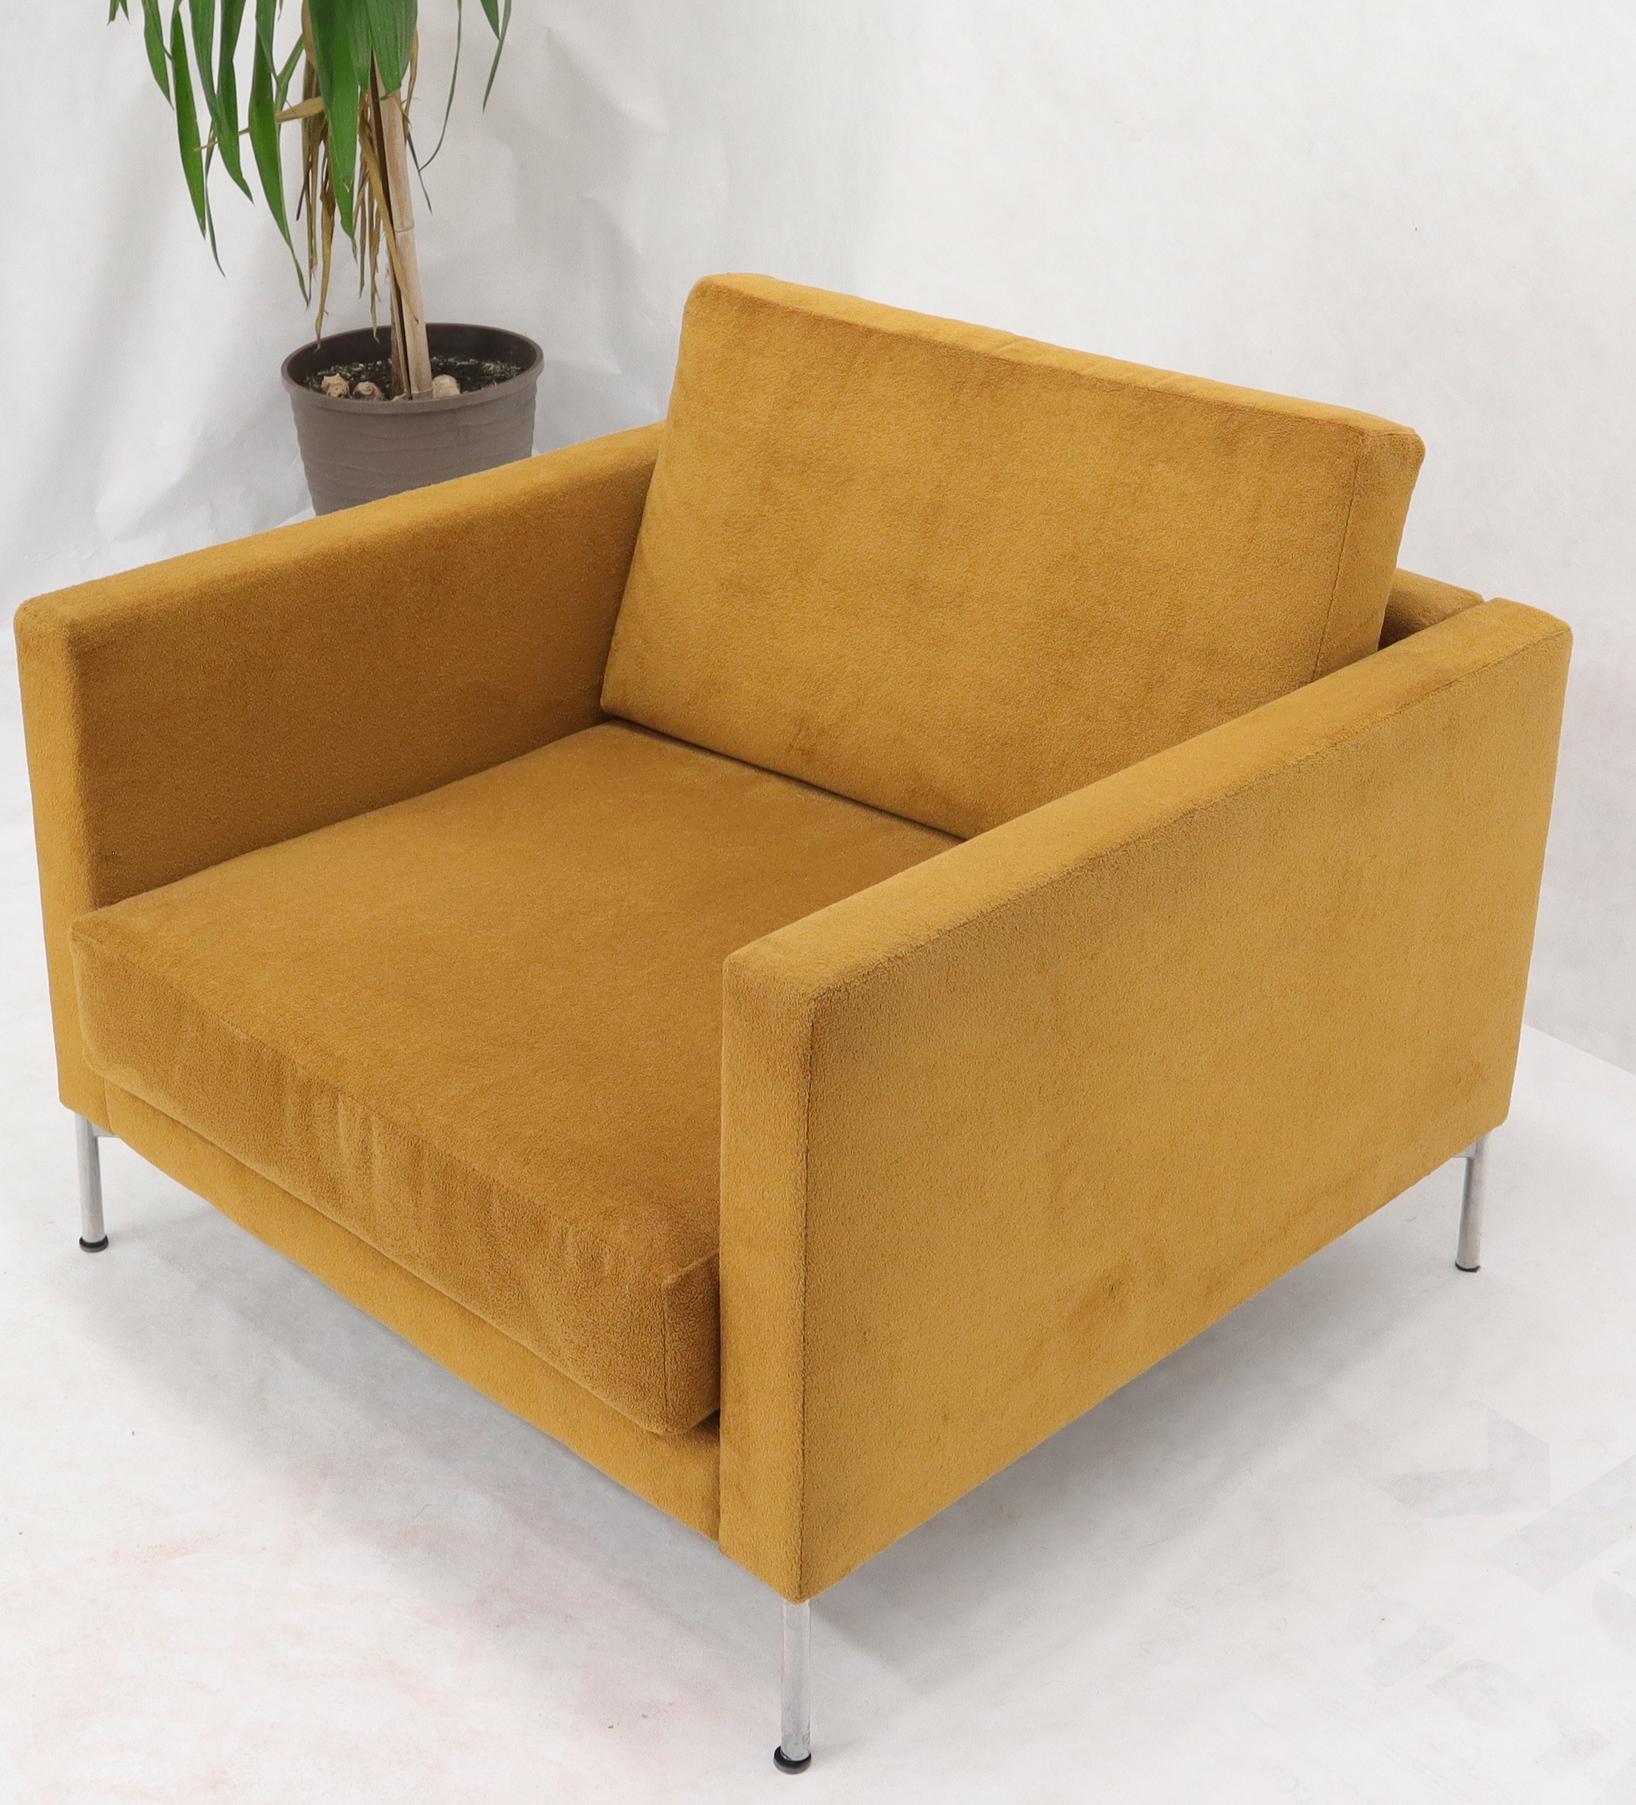 Knoll Mid-Century Modern Box Shape Lounge Chair In Good Condition For Sale In Rockaway, NJ